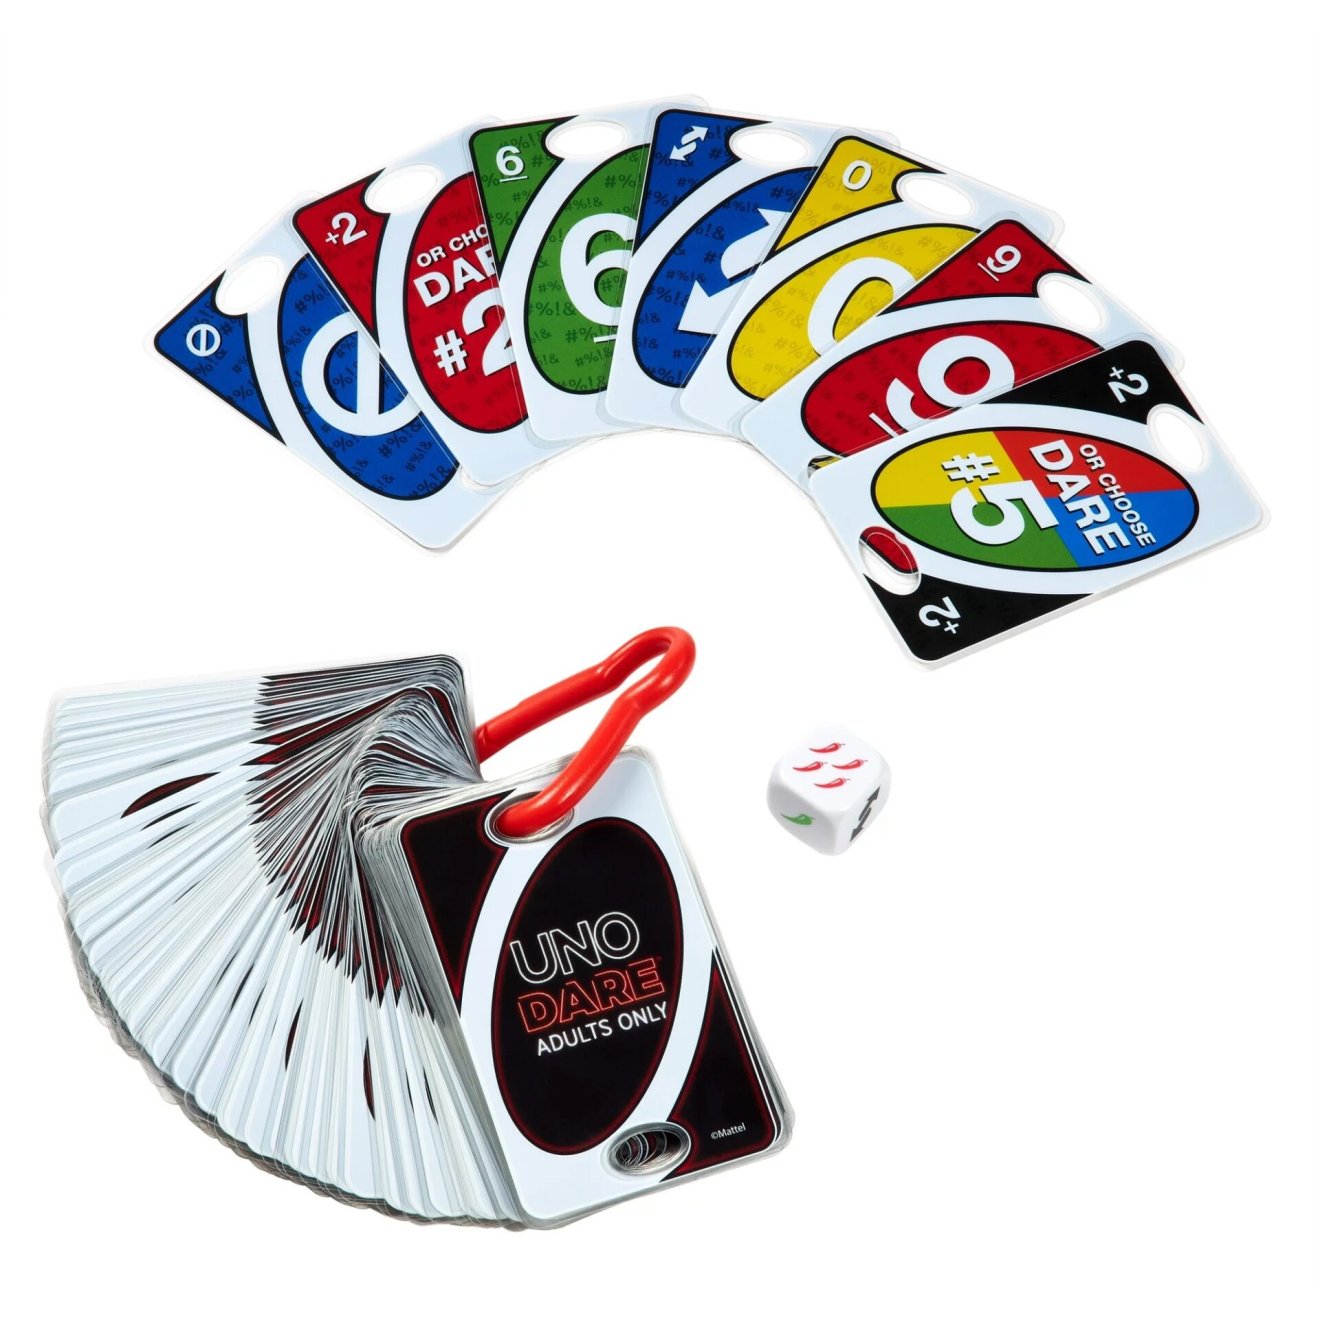 UNO Dare Adults Only